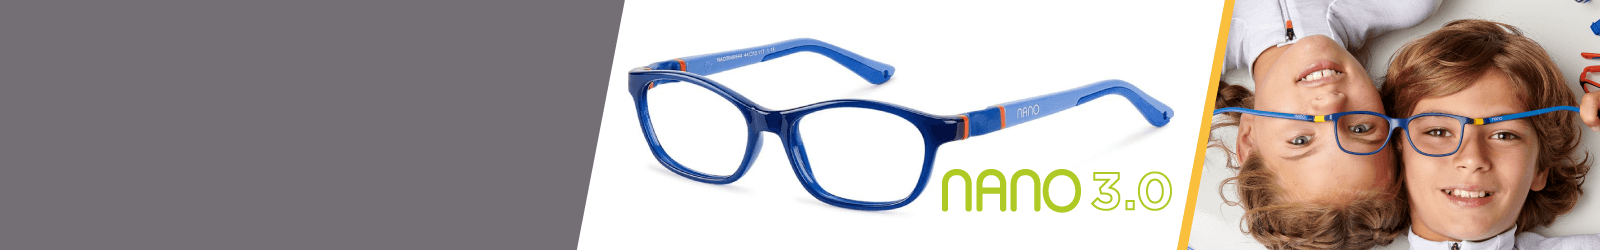 Nano 3.0 Indestructible Eyewear for Kids from 8 to 10-year-old for Girls